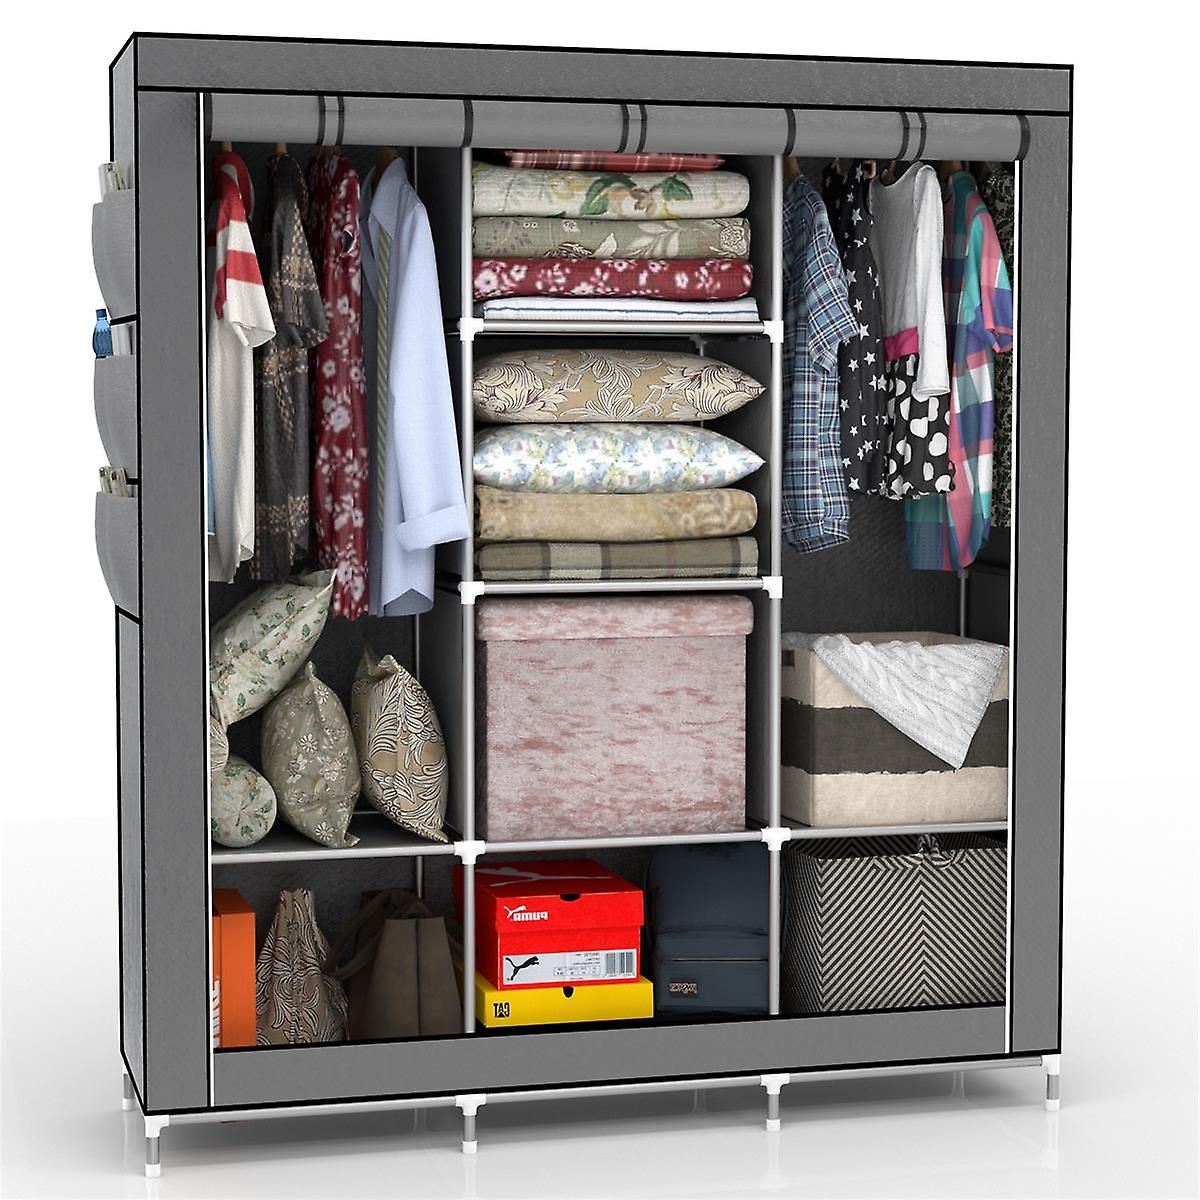 Folding Cabinet 130x175x45 Cm – With Zipper Fabric Cabinet Wardrobe With Clothes  Rail, Compartments And Side Pocket | Fruugo It Within Rail Clothes Storage Cupboard Wardrobes (Gallery 1 of 20)